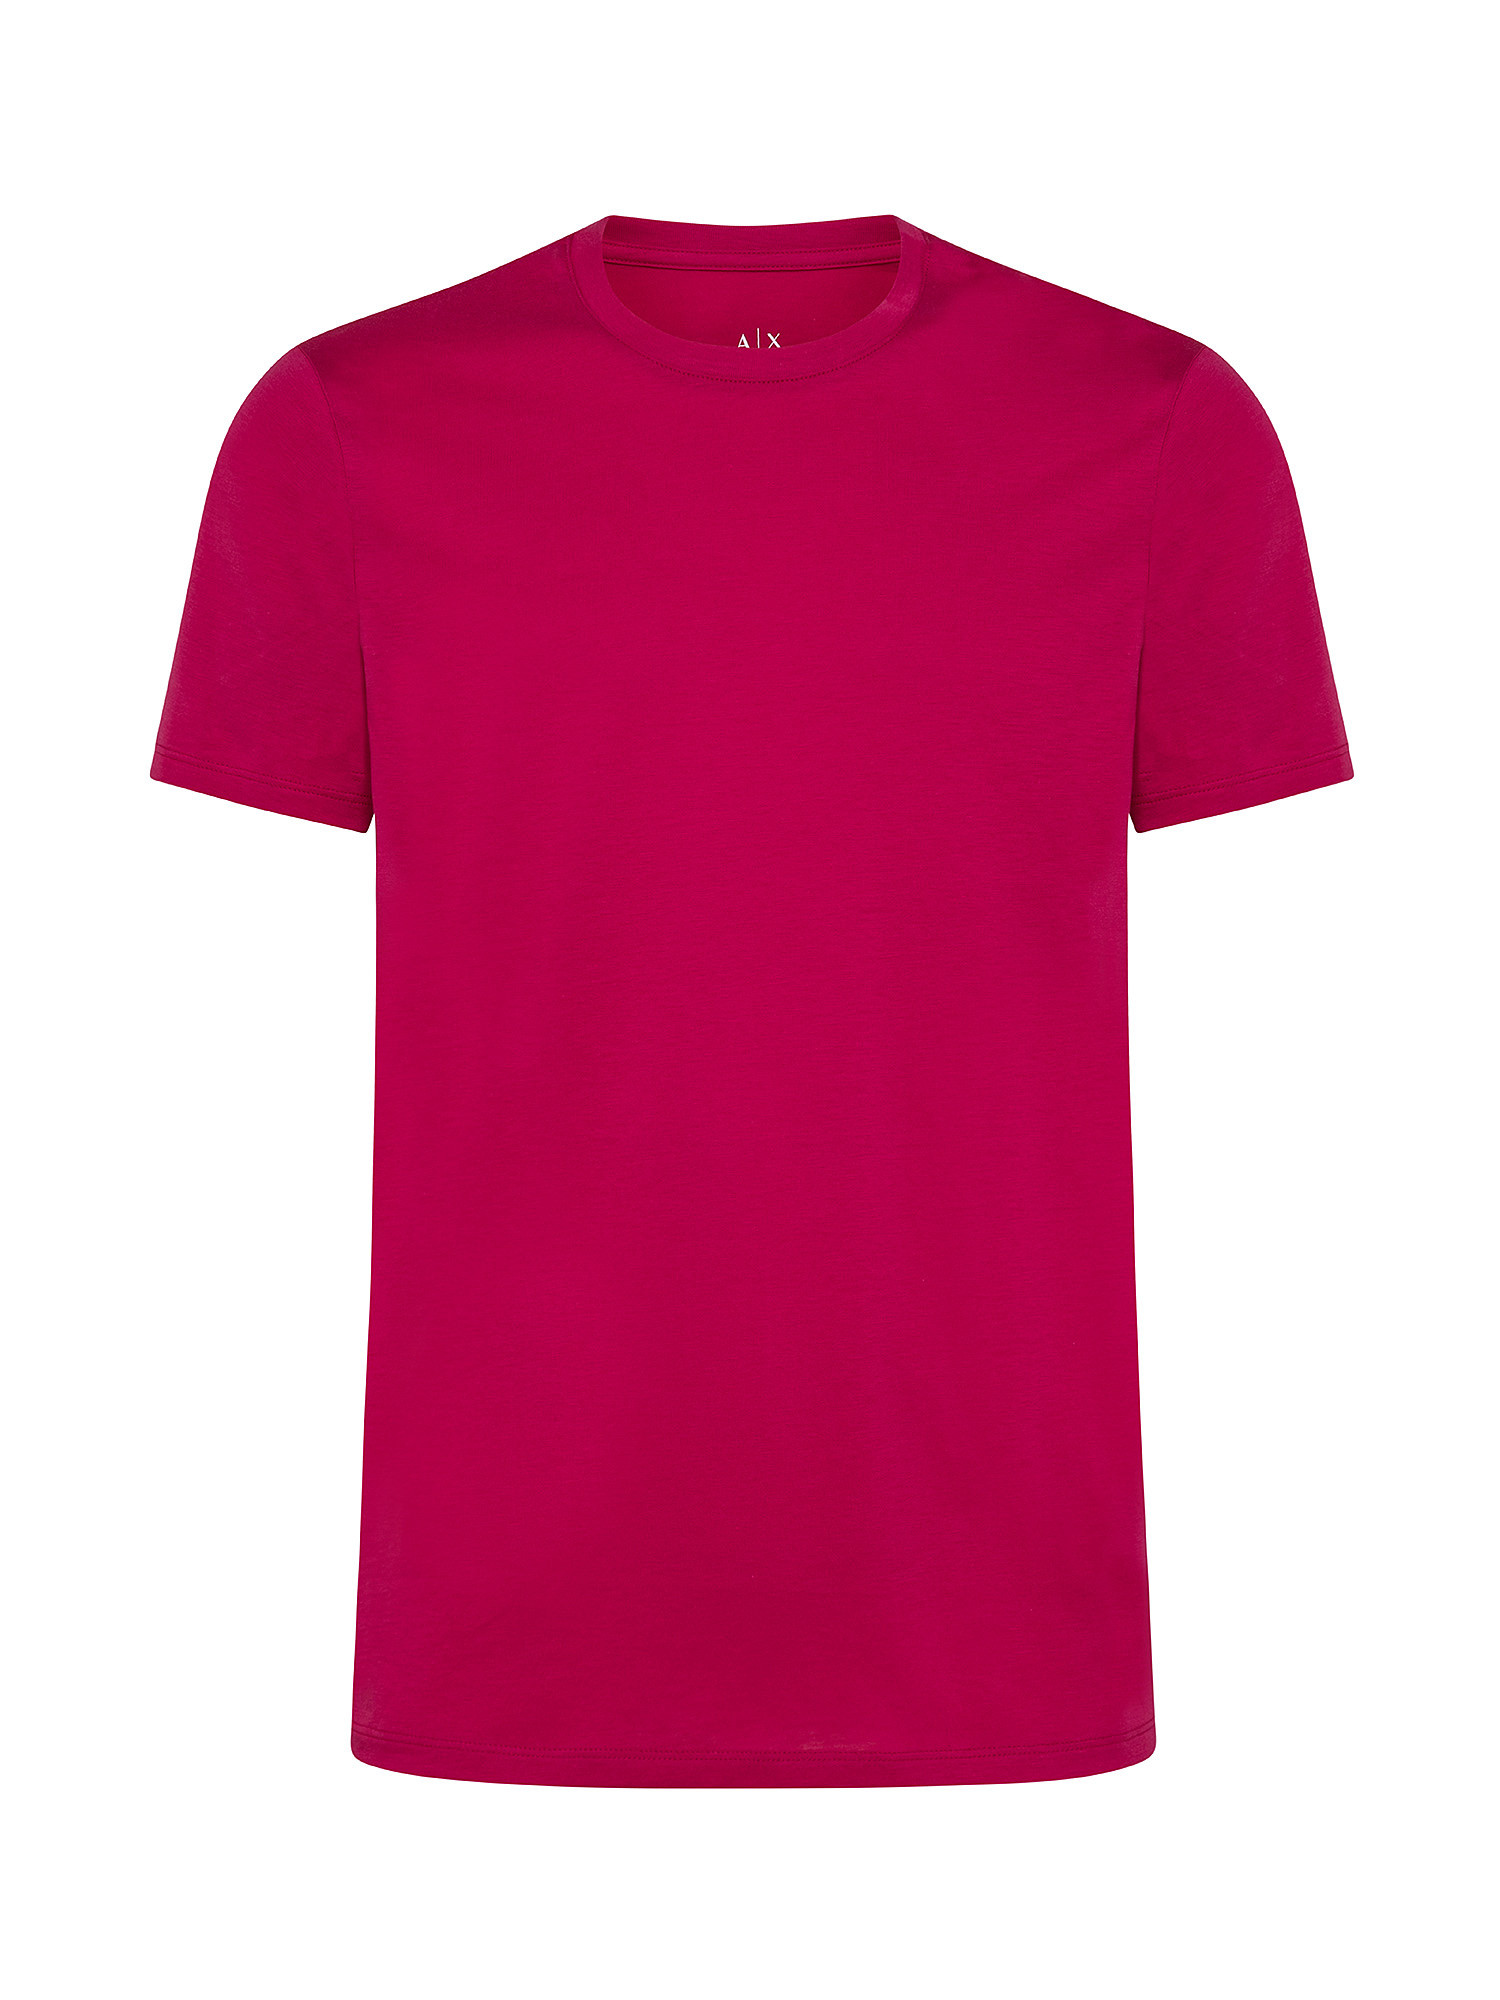 T-shirt, Rosa fuxia, large image number 0